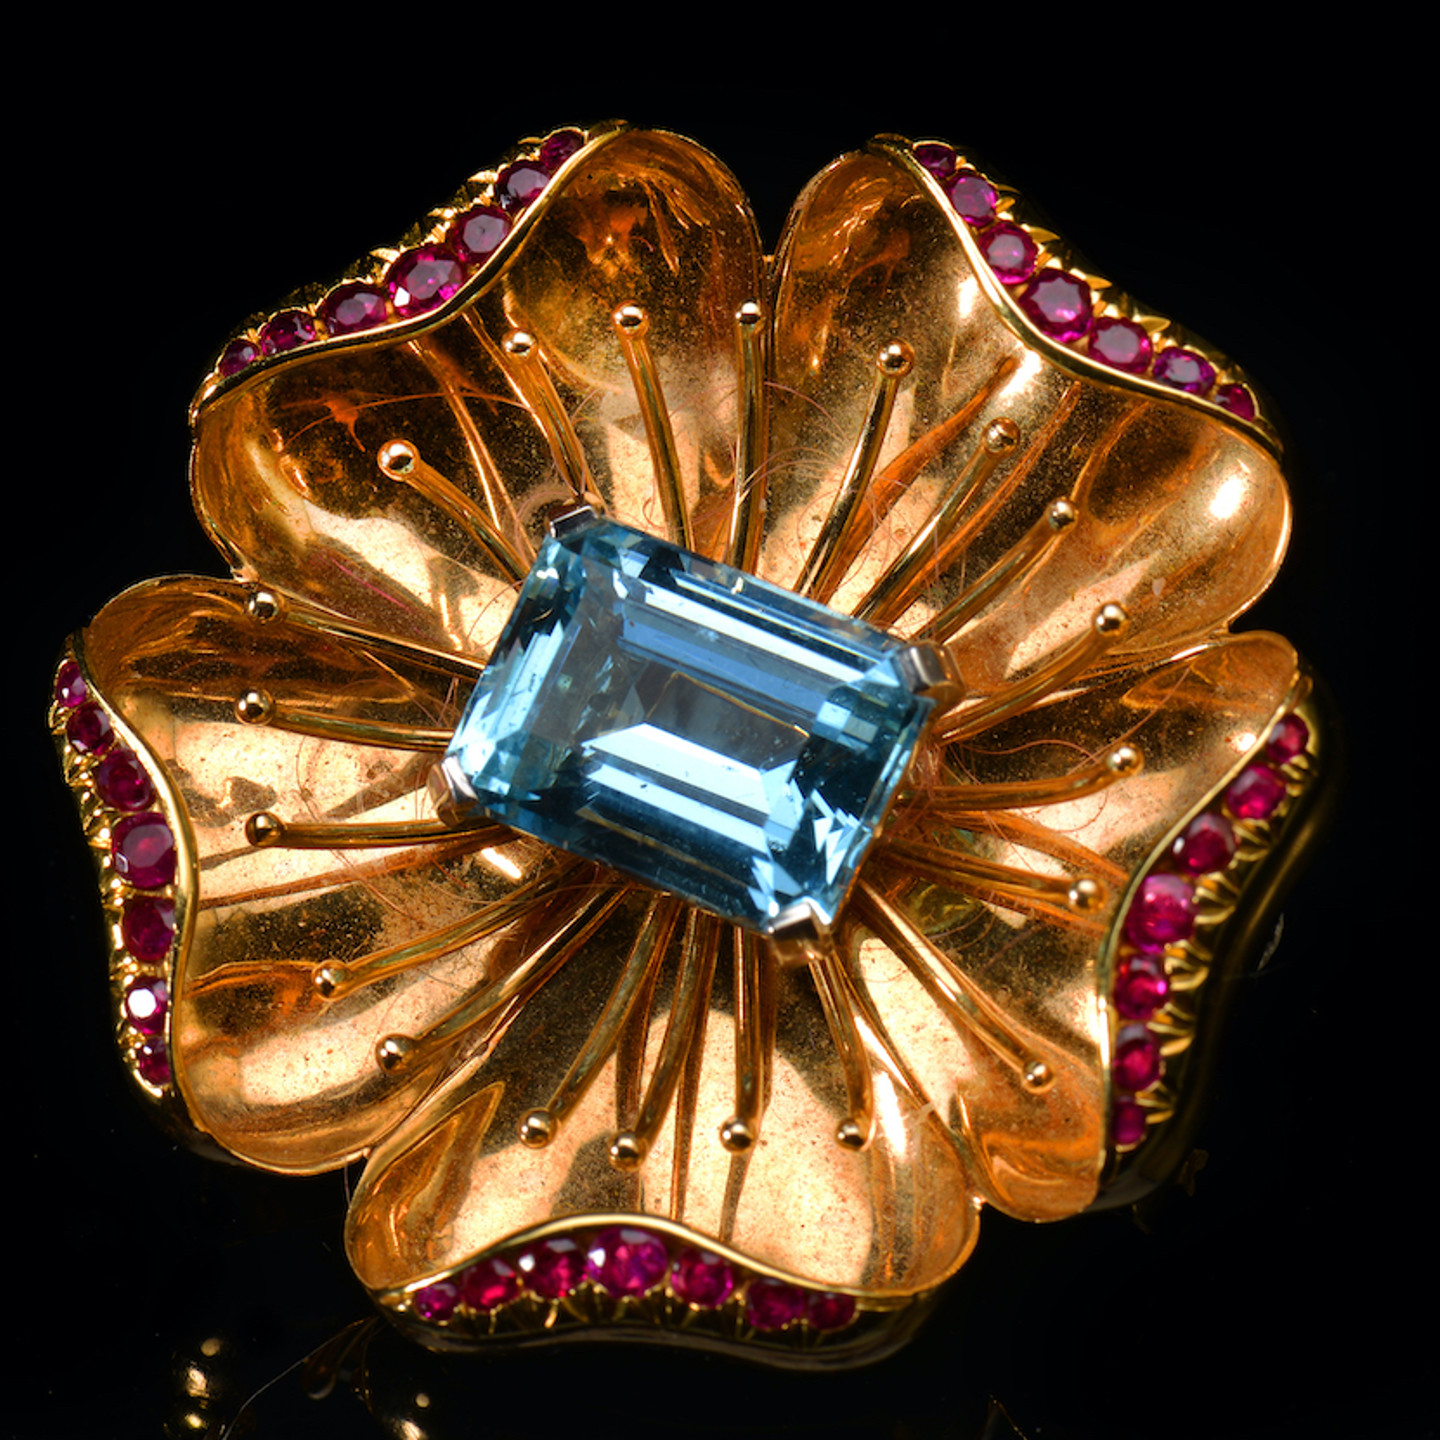 A Tiffany & Co Brooch In The Form Of A Flower Set With A Central Emerald Cut Aquamarine. Sold For £2000